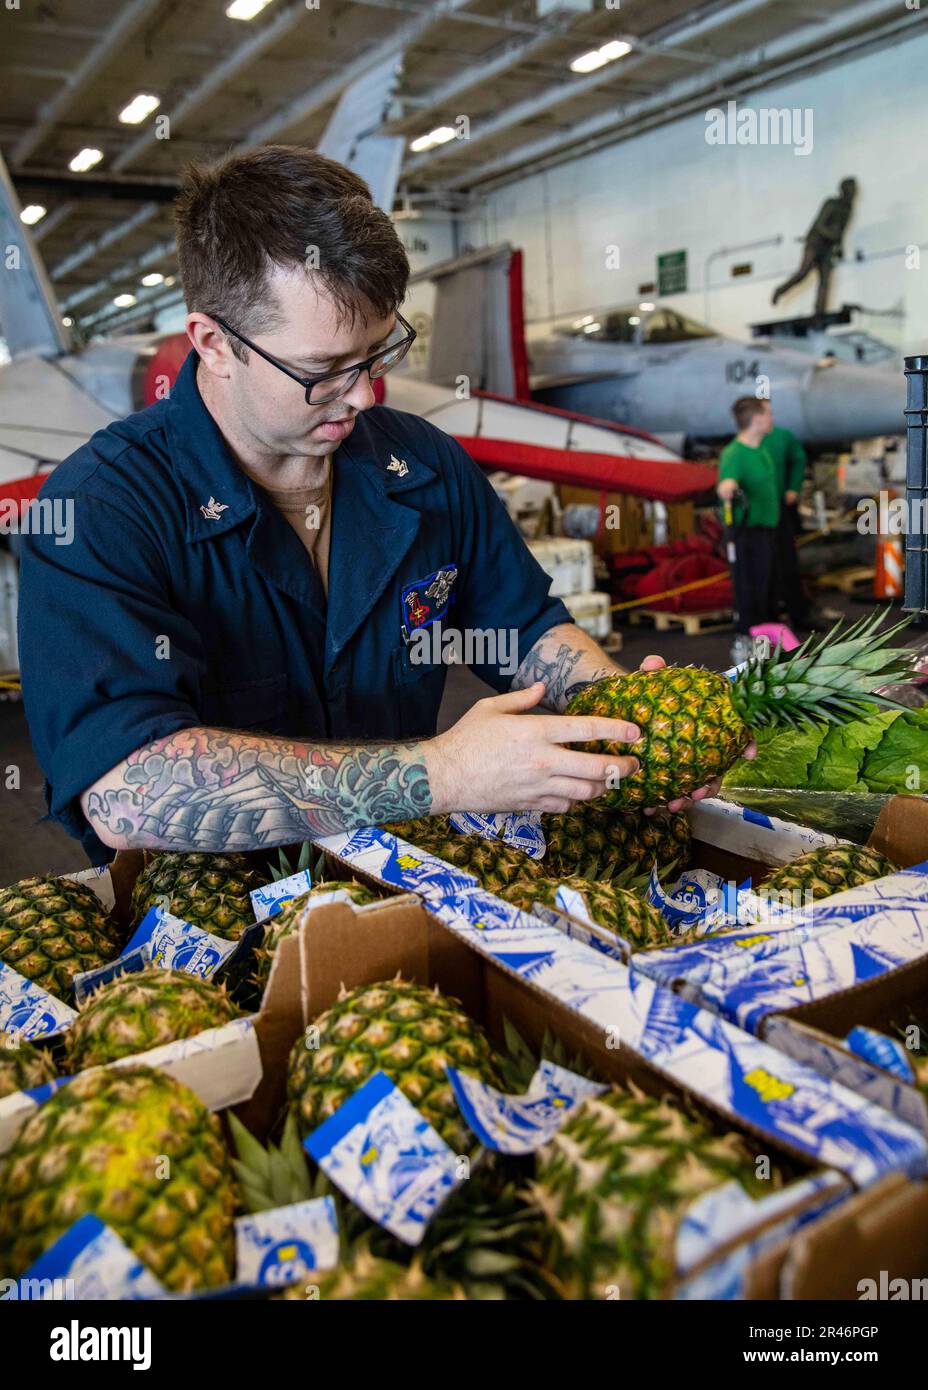 230401-N-IX644-1013 IONIAN SEA (April 1, 2023) Hospital Corpsman 2nd Class Sean Harris, assigned to the Nimitz-class aircraft carrier USS George H.W. Bush (CVN 77), inspects produce during a replenishment-at-sea with the Supply-class fast combat support ship USNS Arctic (T-AOE 8), April 1, 2023. The George H.W. Bush Carrier Strike Group is on a scheduled deployment in the U.S. Naval Forces Europe area of operations, employed by U.S. Sixth Fleet to defend U.S., allied, and partner interests. Stock Photo